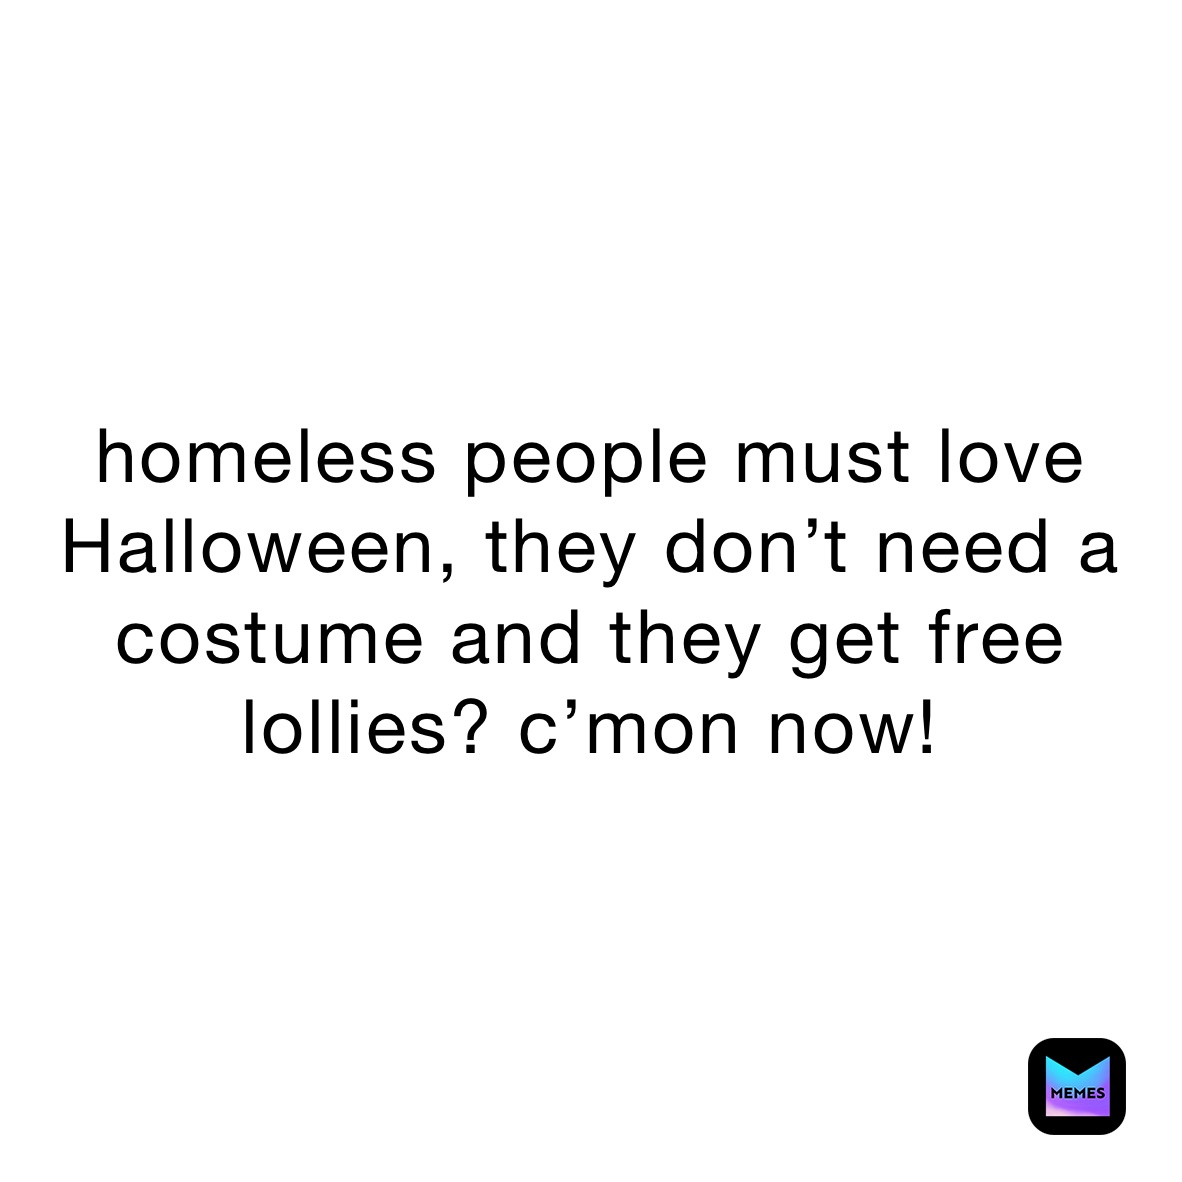 homeless people must love Halloween, they don’t need a costume and they get free lollies? c’mon now! 